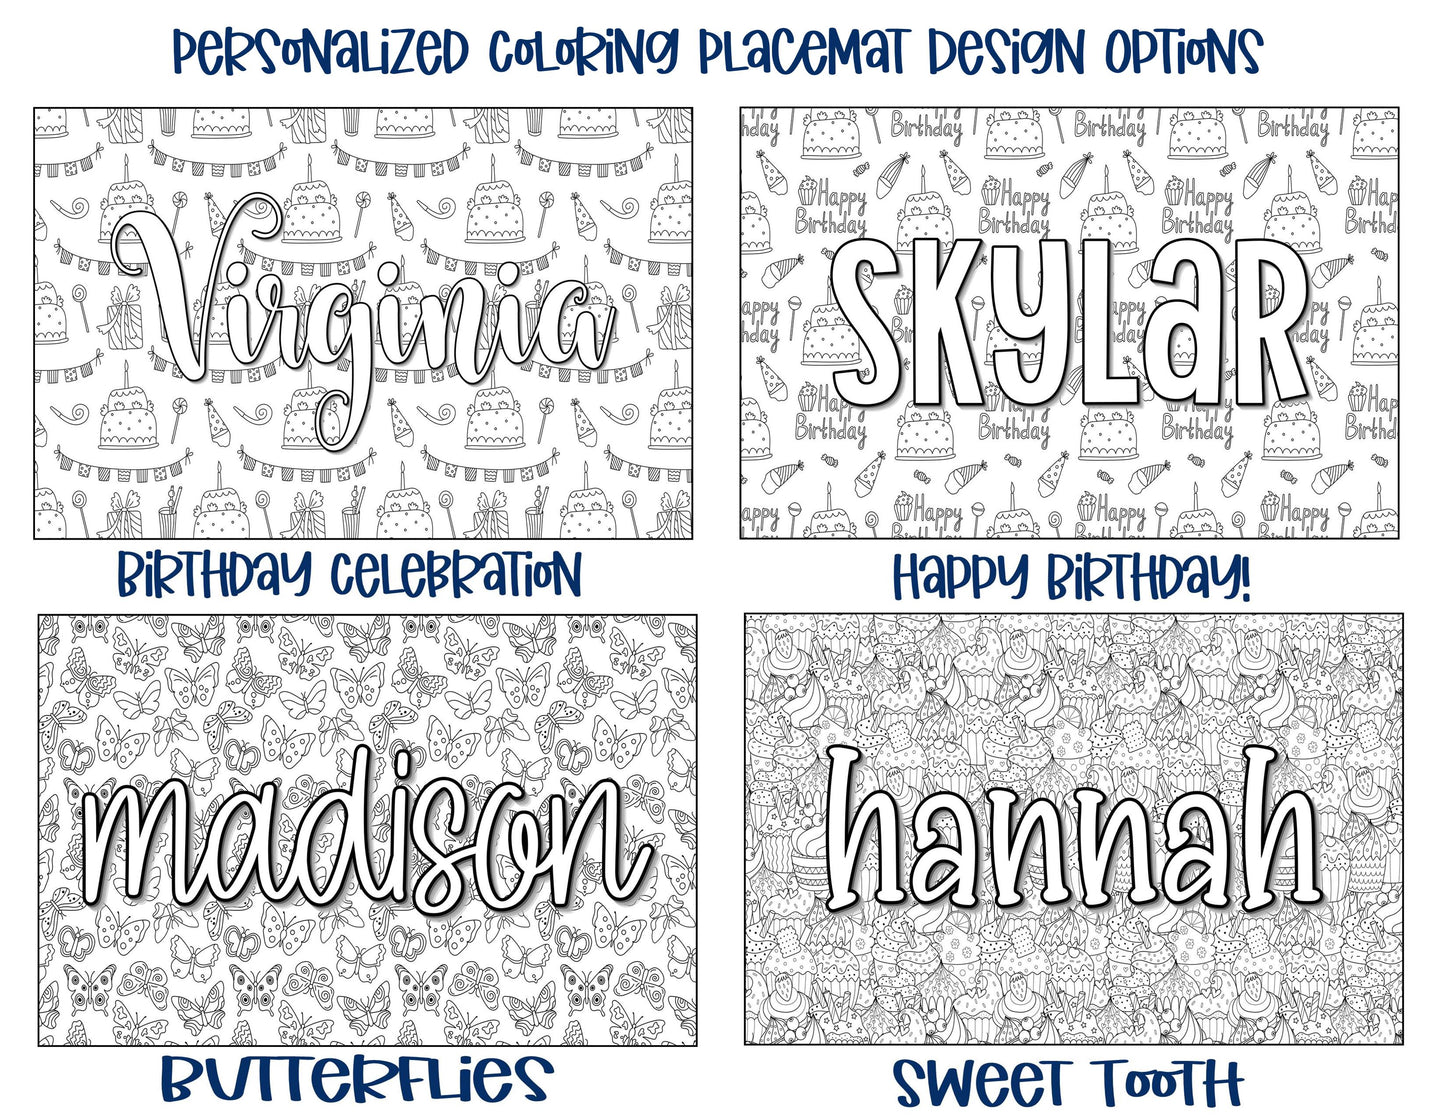 Personalized Coloring Name Placemat - Busy Rainbows